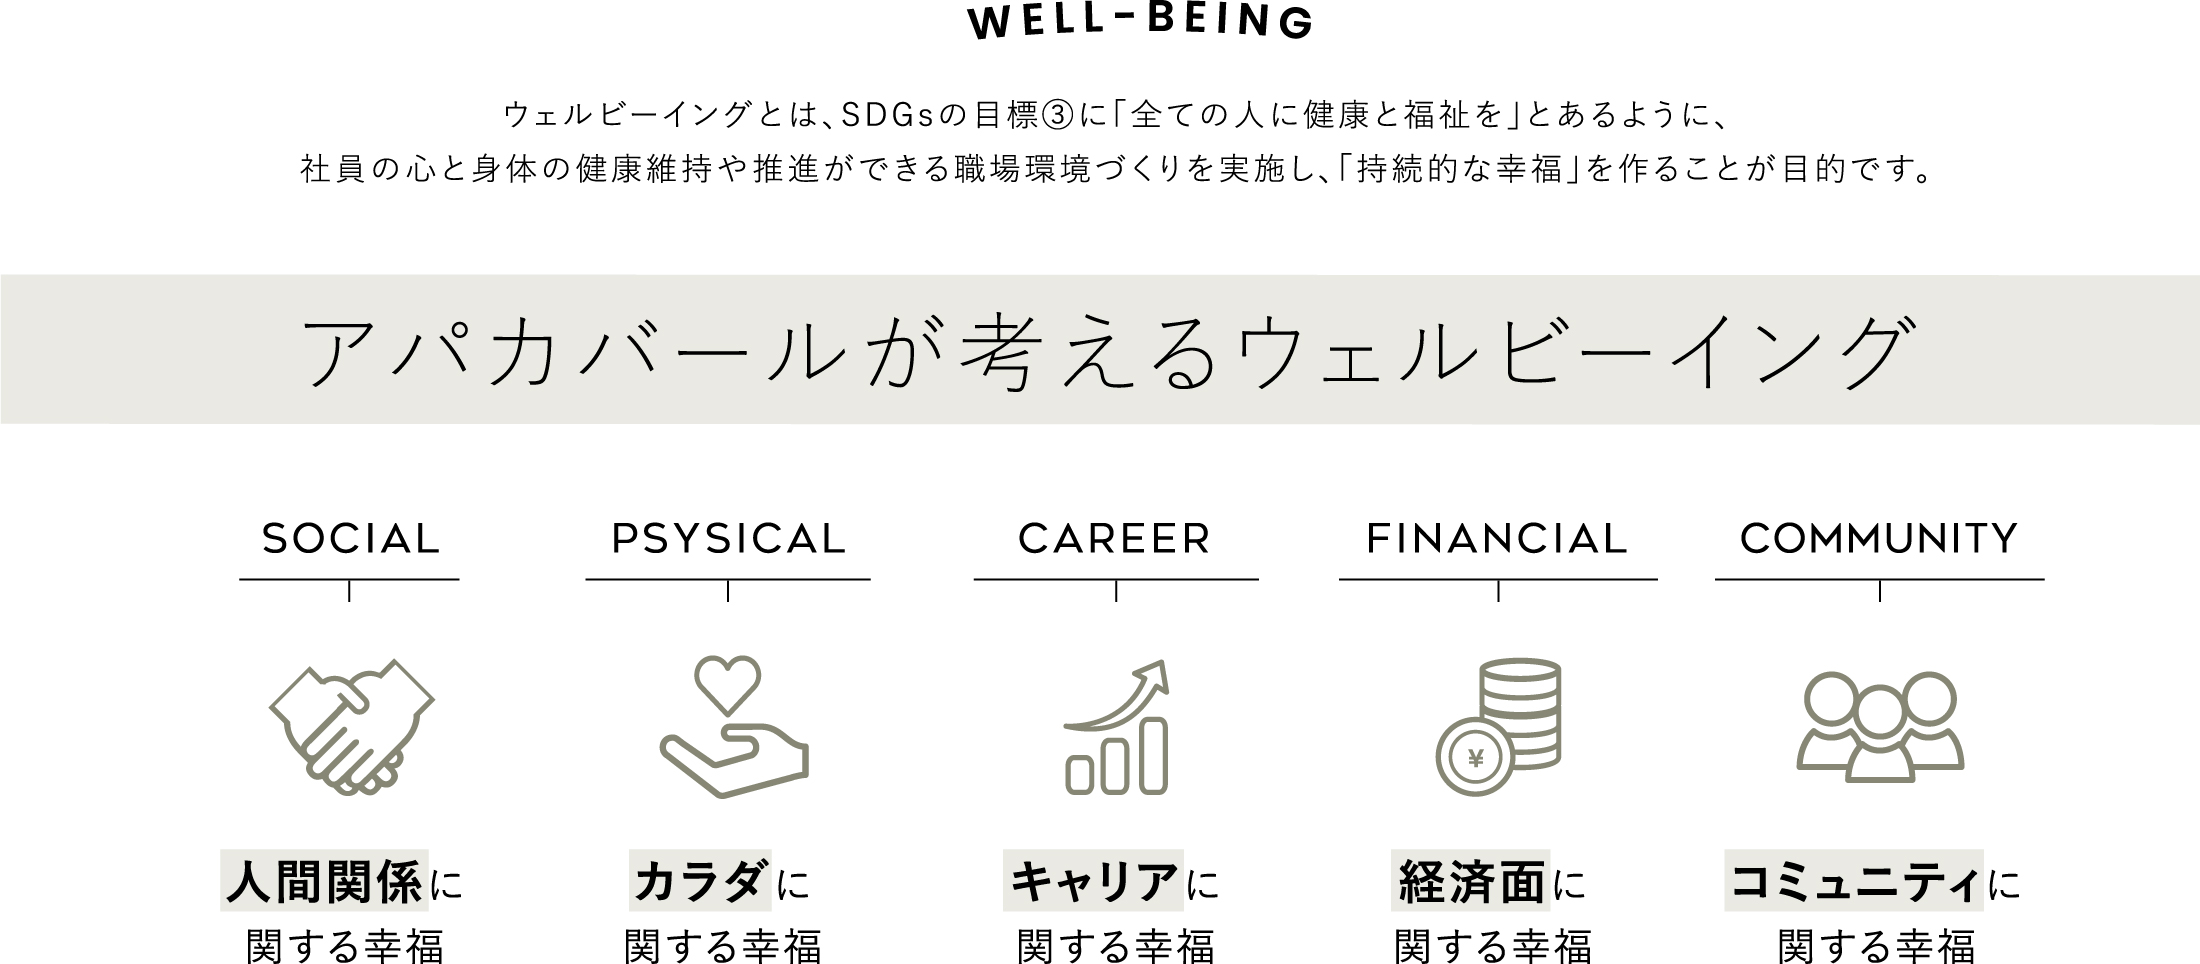 WELL-BEING